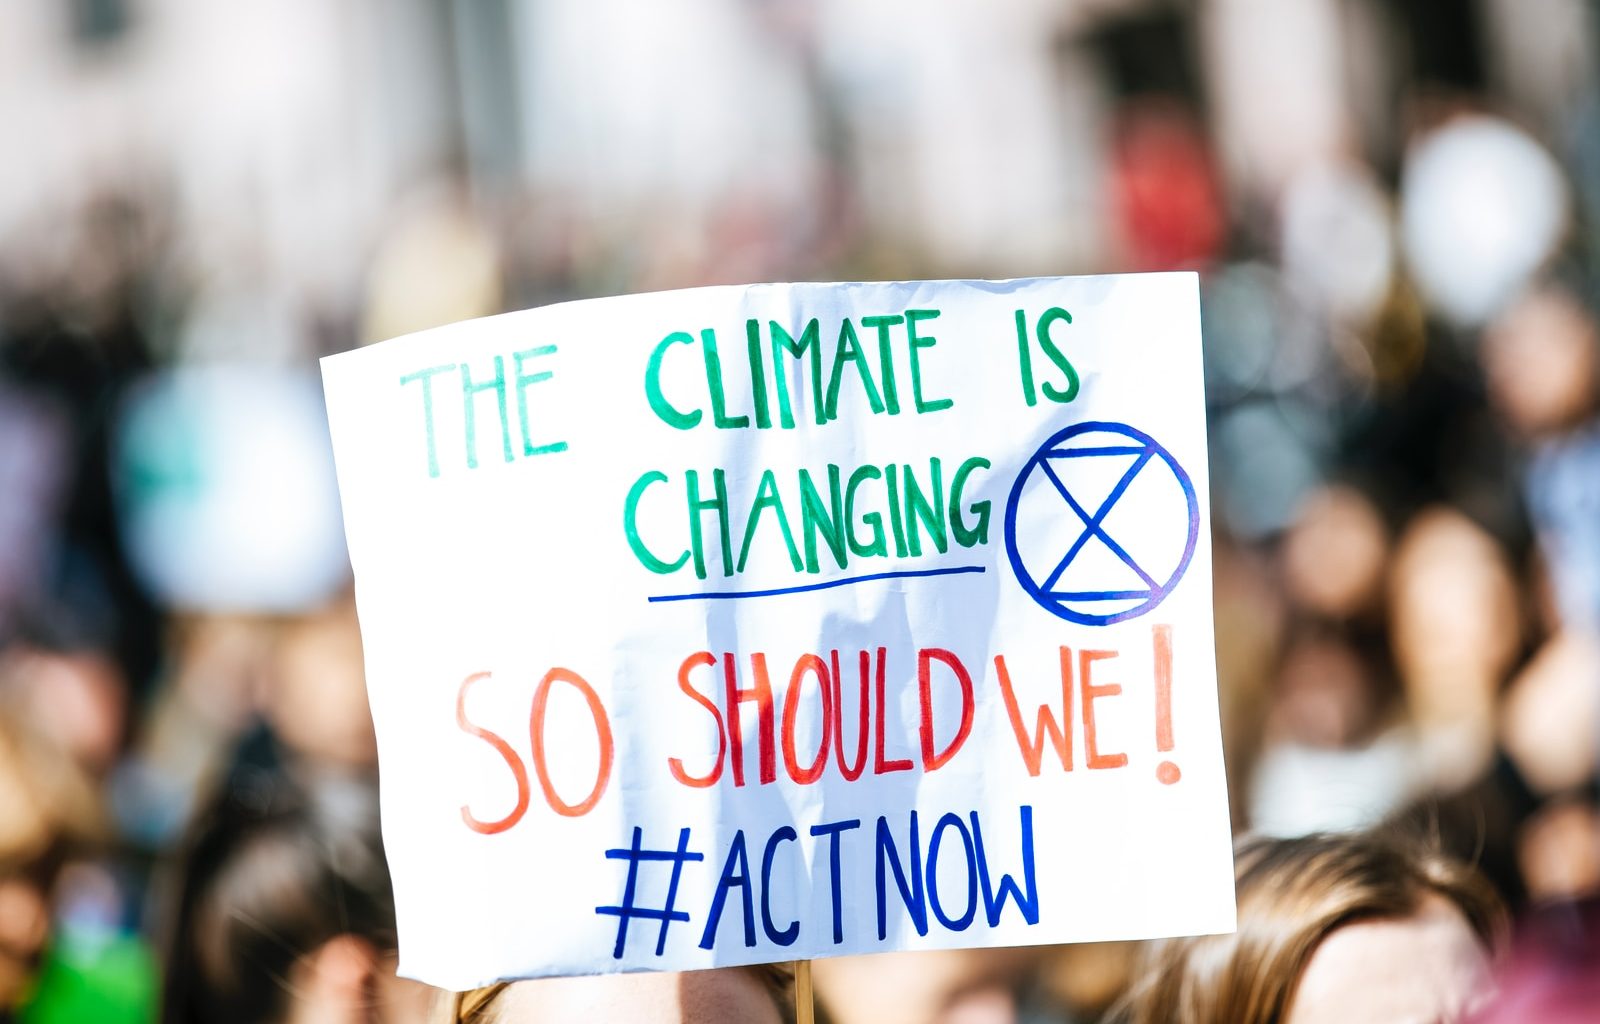 person holding The Climate is Changing signage